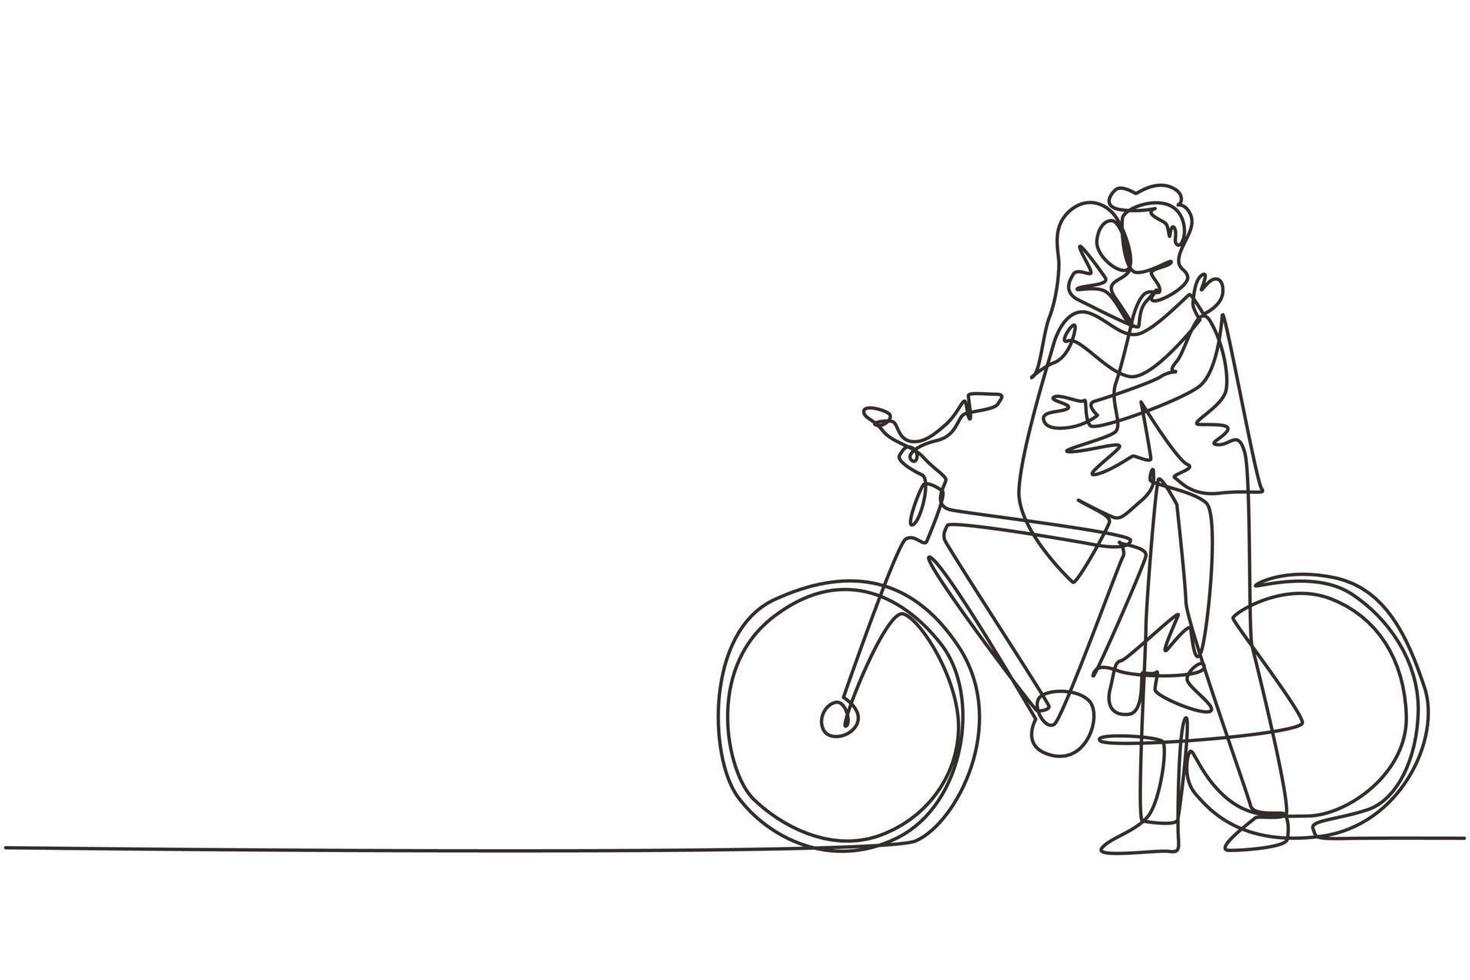 Continuous one line drawing young loving Arabian couple sitting on bicycle and kissing. Romantic human relations, love story, newlywed family in honeymoon traveling adventure. Single line draw design vector